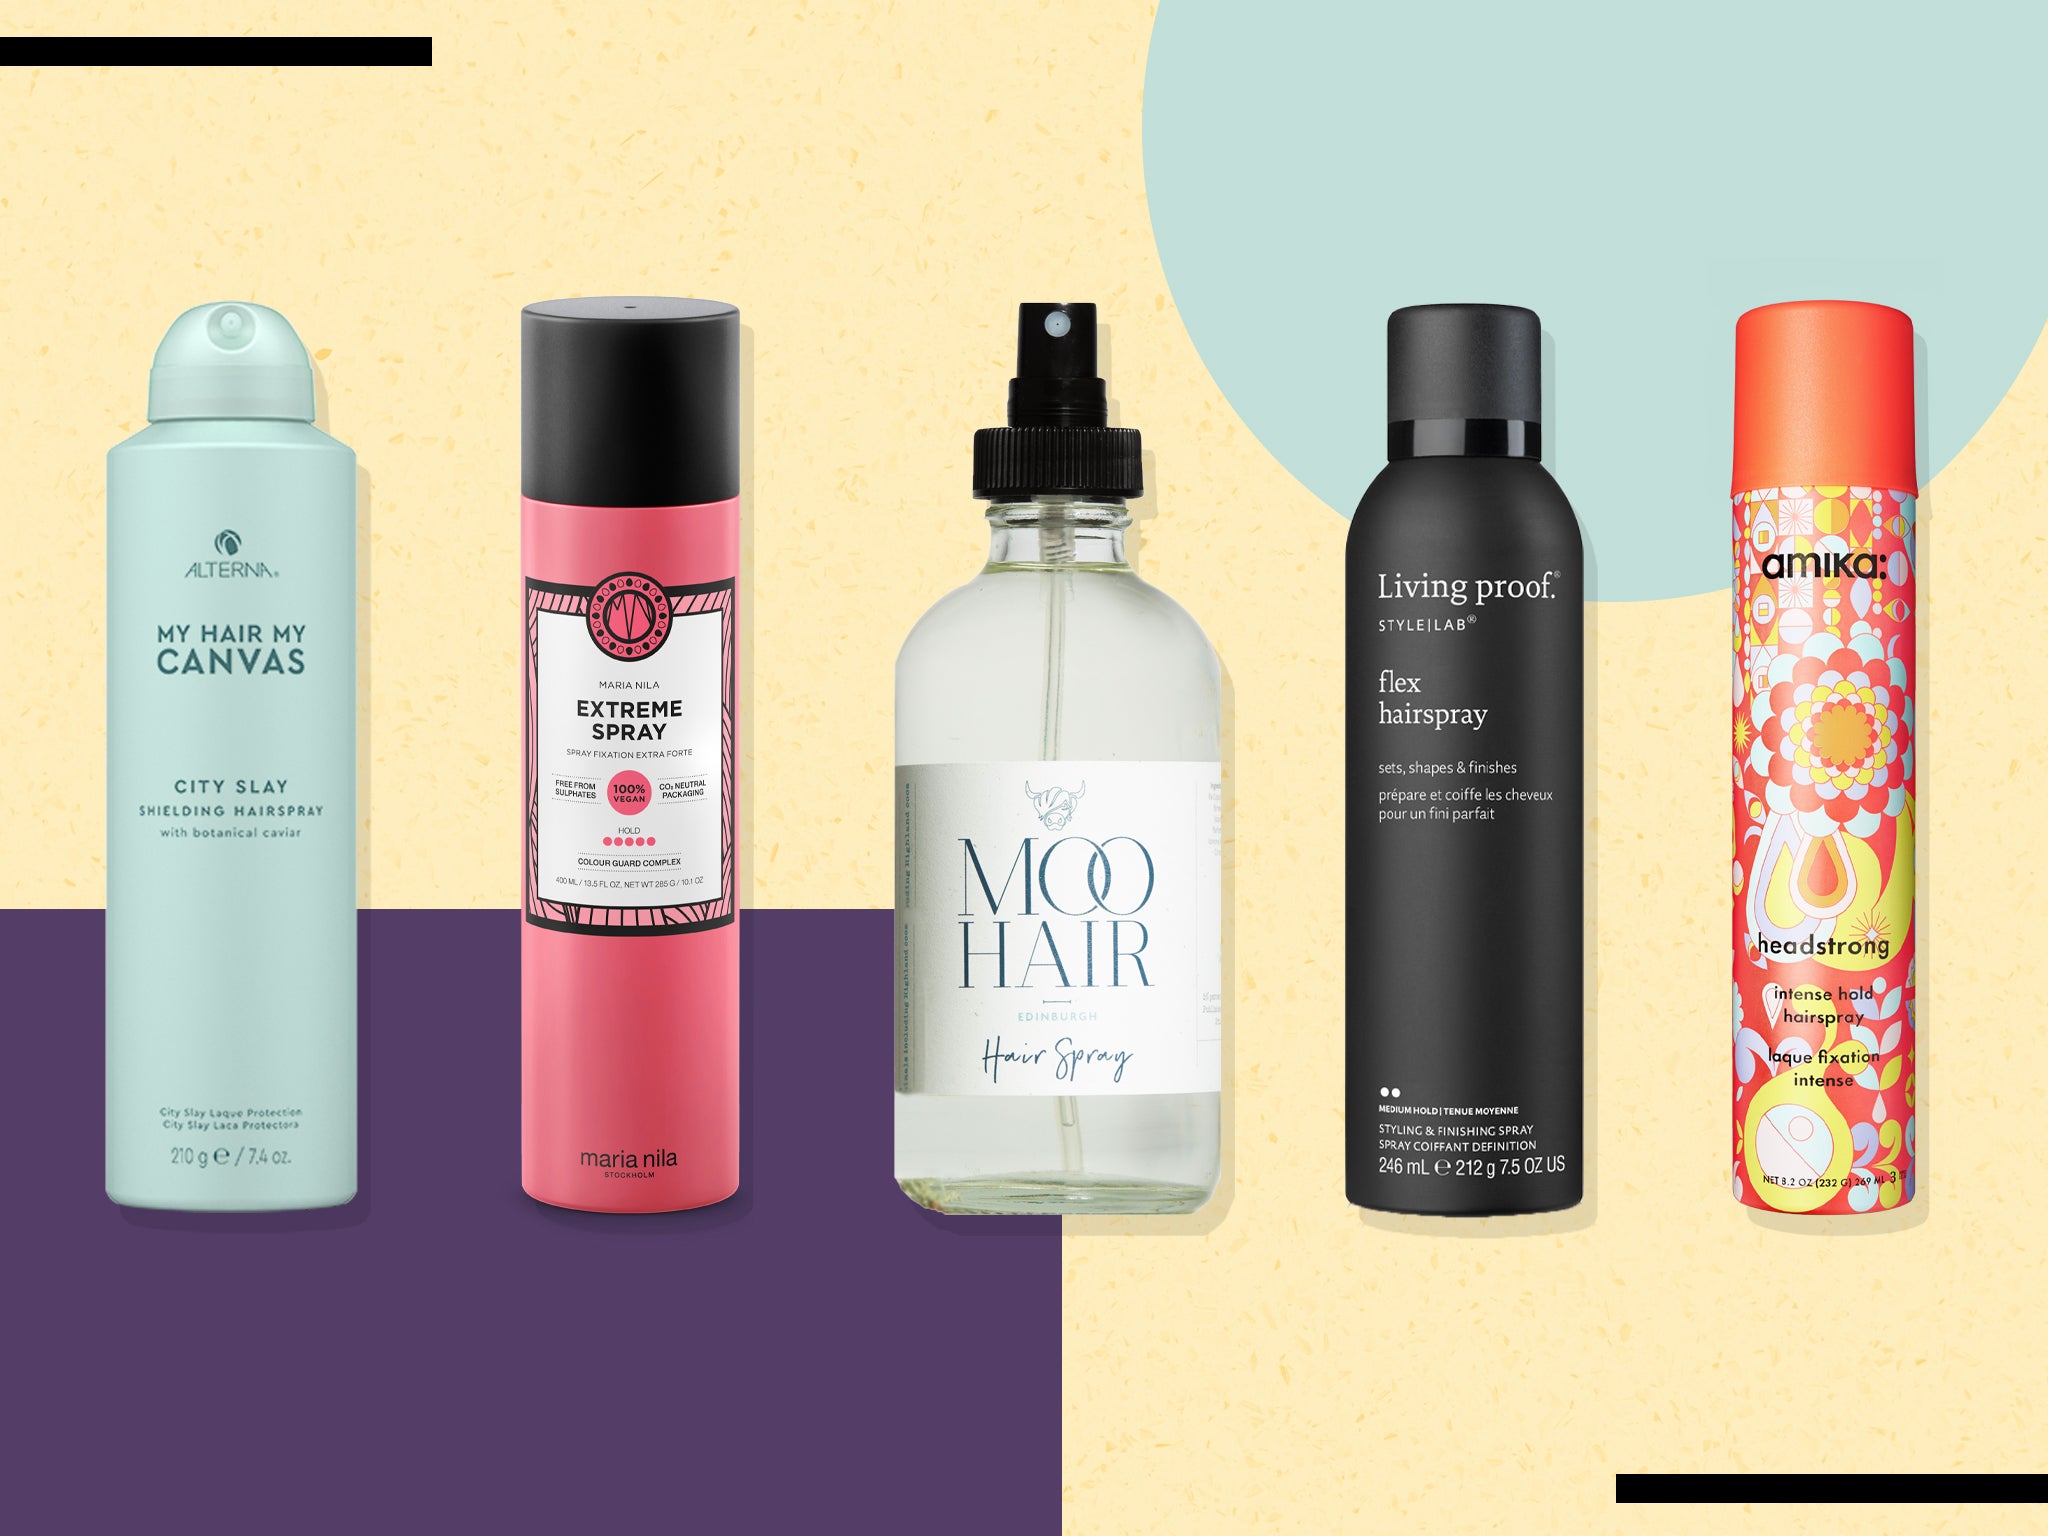 A good hairspray can give you a fresh-from-the-hairdresser look without feeling too rigid